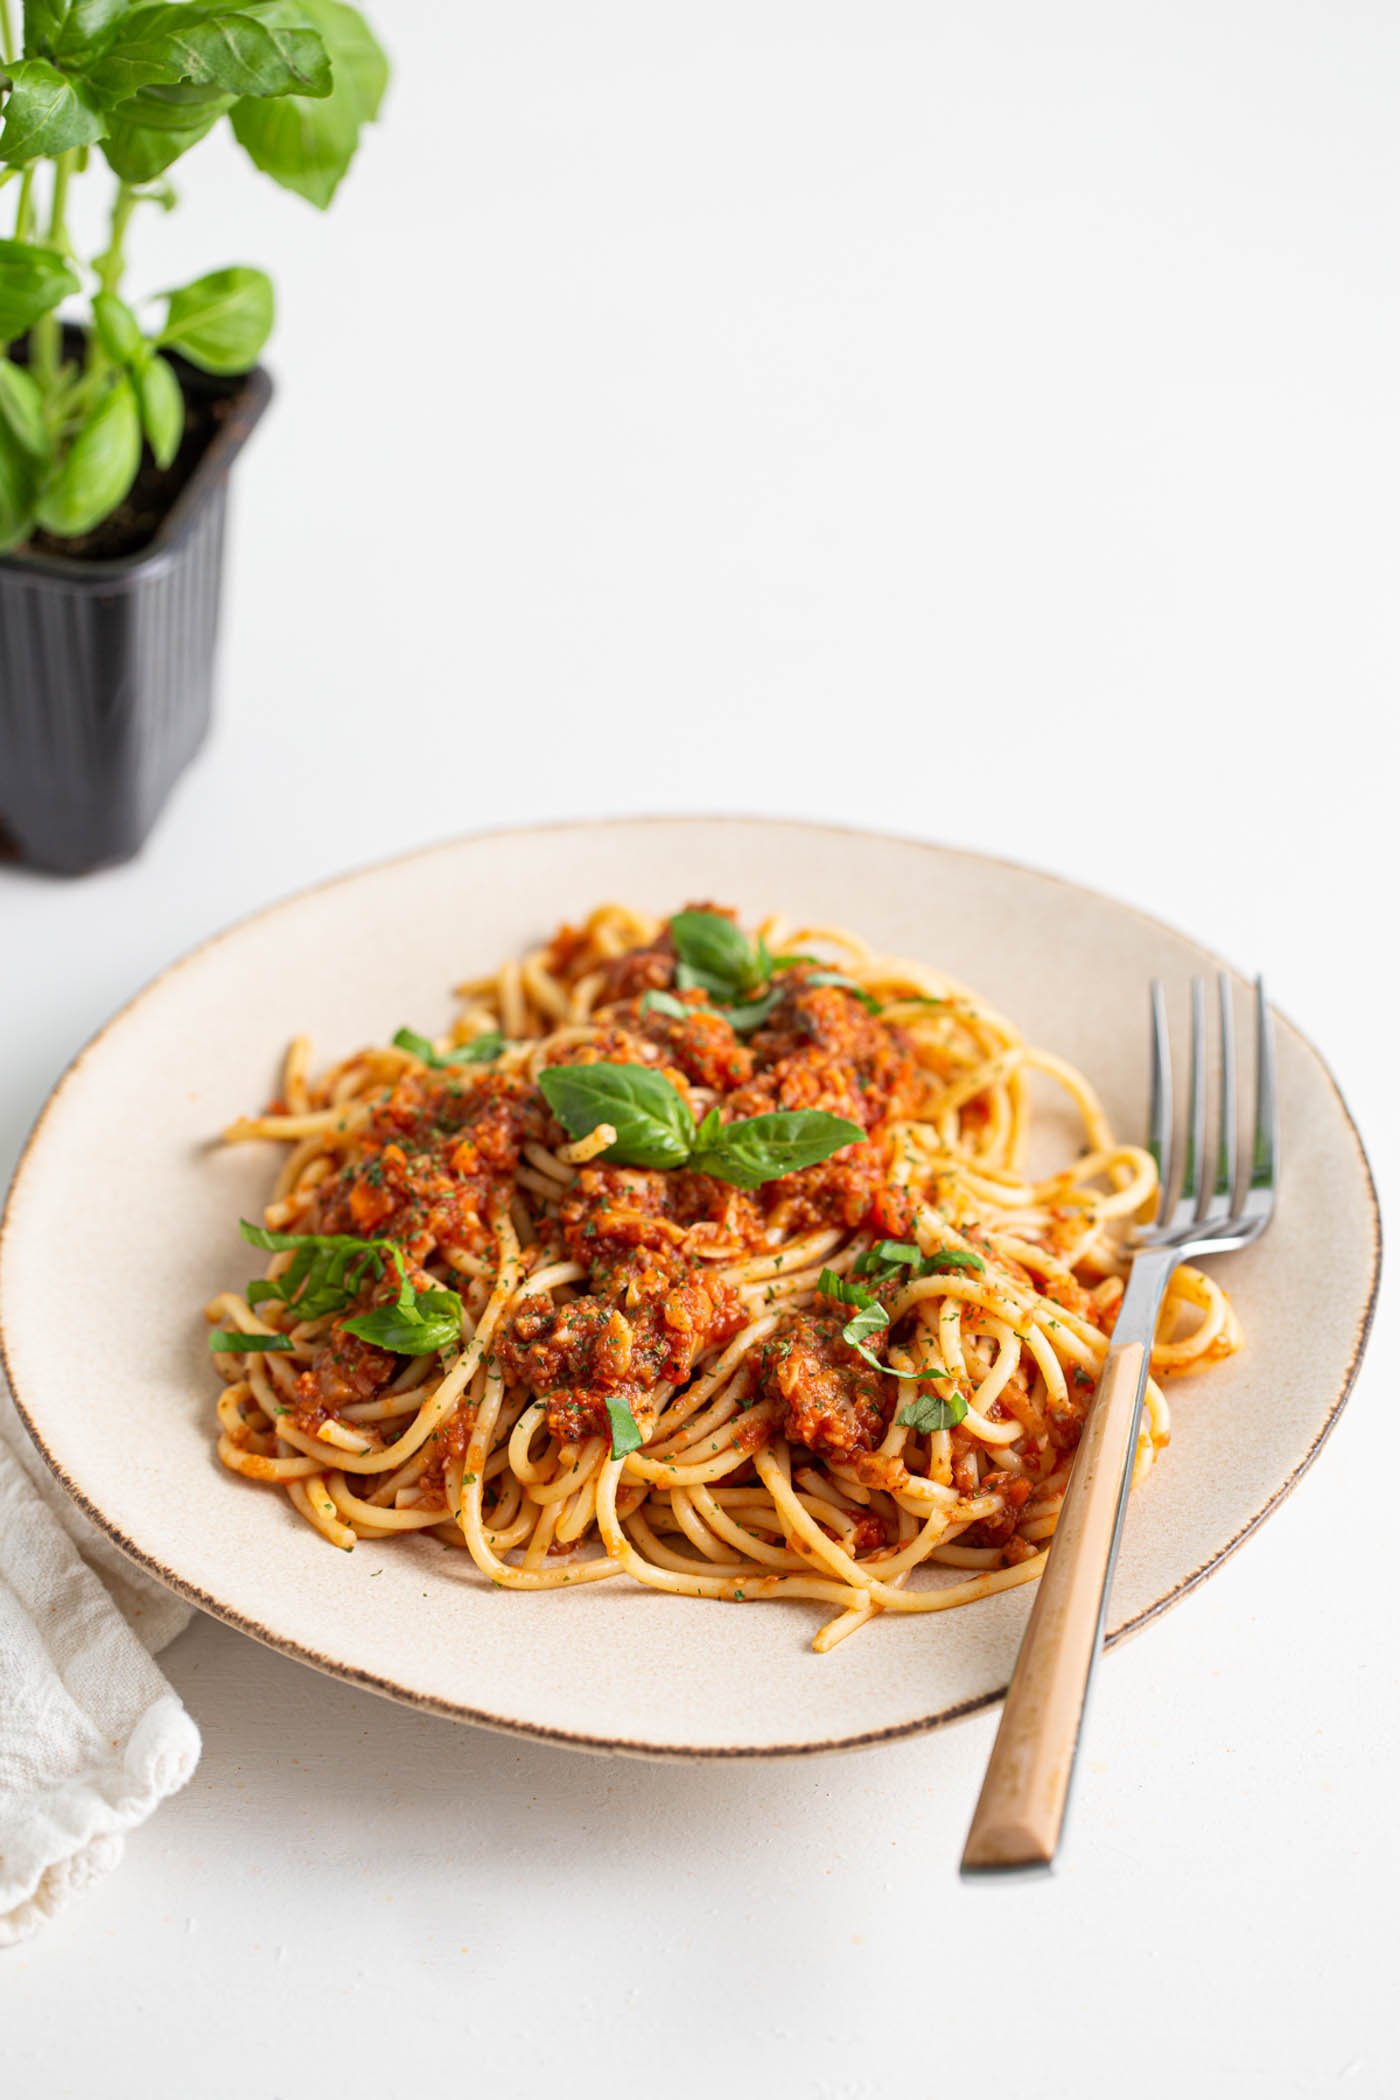 Plate of vegan mushroom bolognese sauce over spaghetti topped with basil and parmesan. A fork rests on the plate and there's a fresh basil plant in the background.